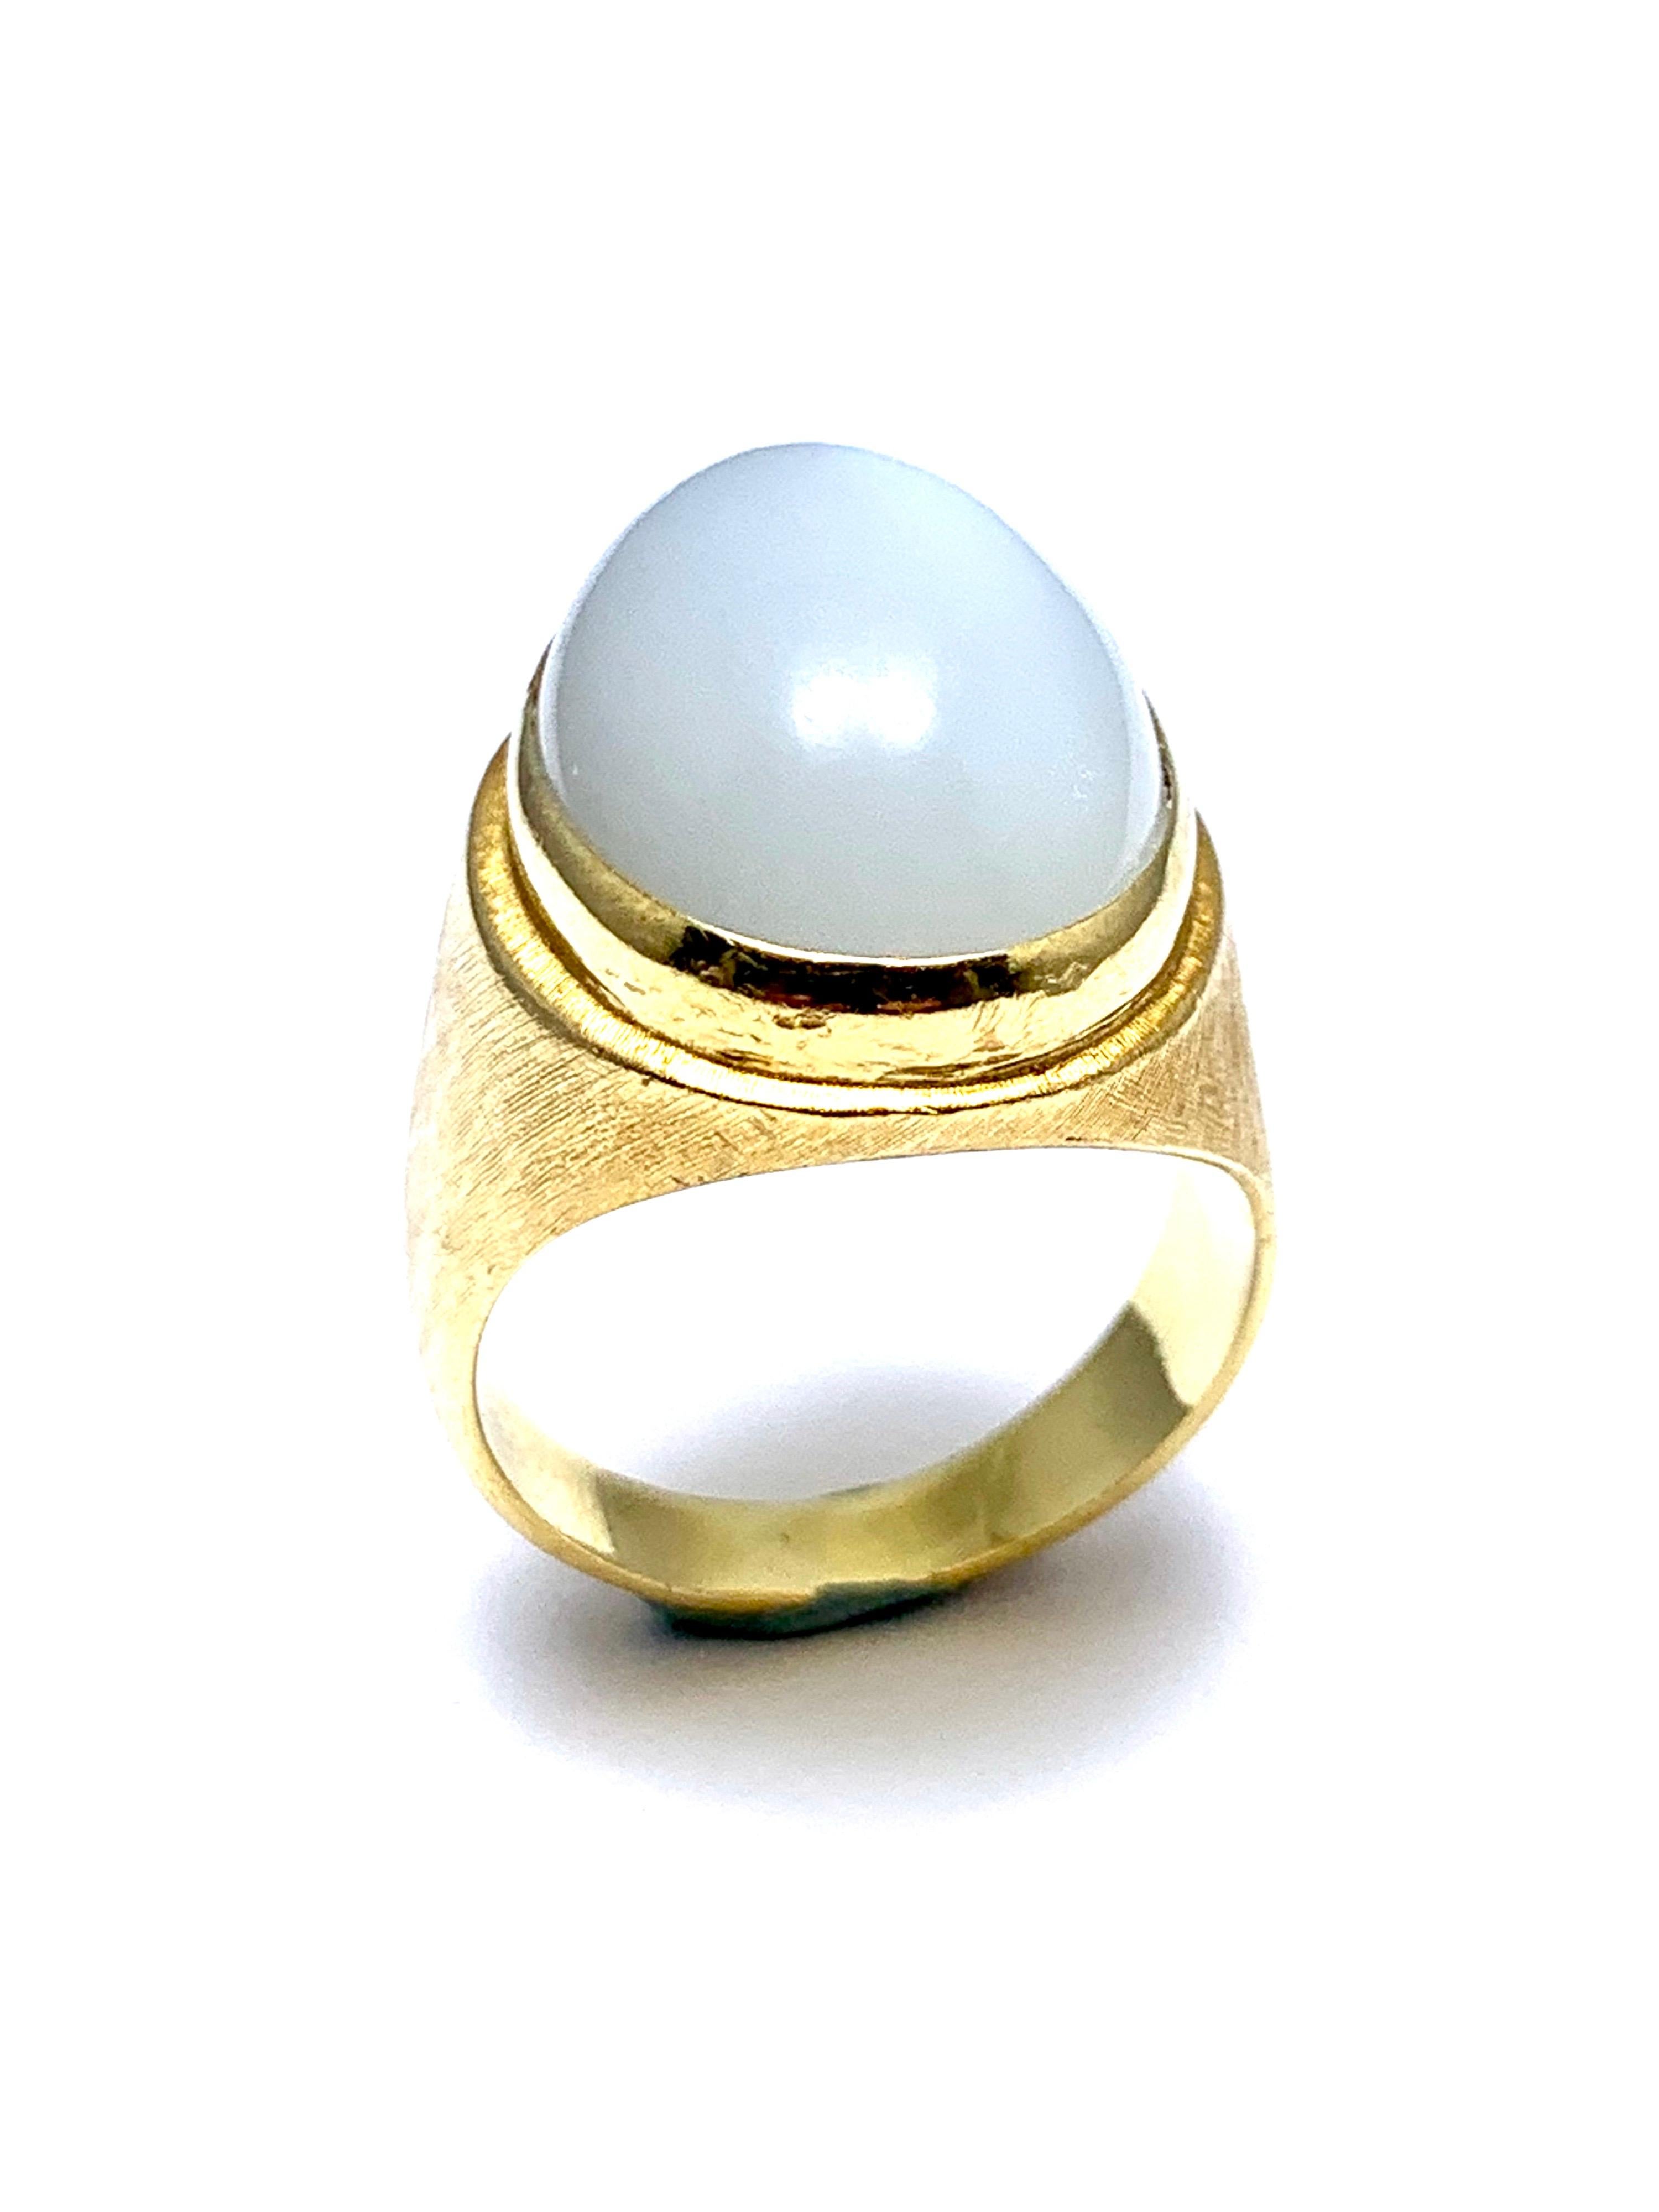 A beautiful Moonstone fashion ring designed by Bruno Guidi. The 11.88 cabochon Moonstone displays a lustrous adularescence, bezel set in an 18 karat yellow gold simple design ring. The inside shank is signed 